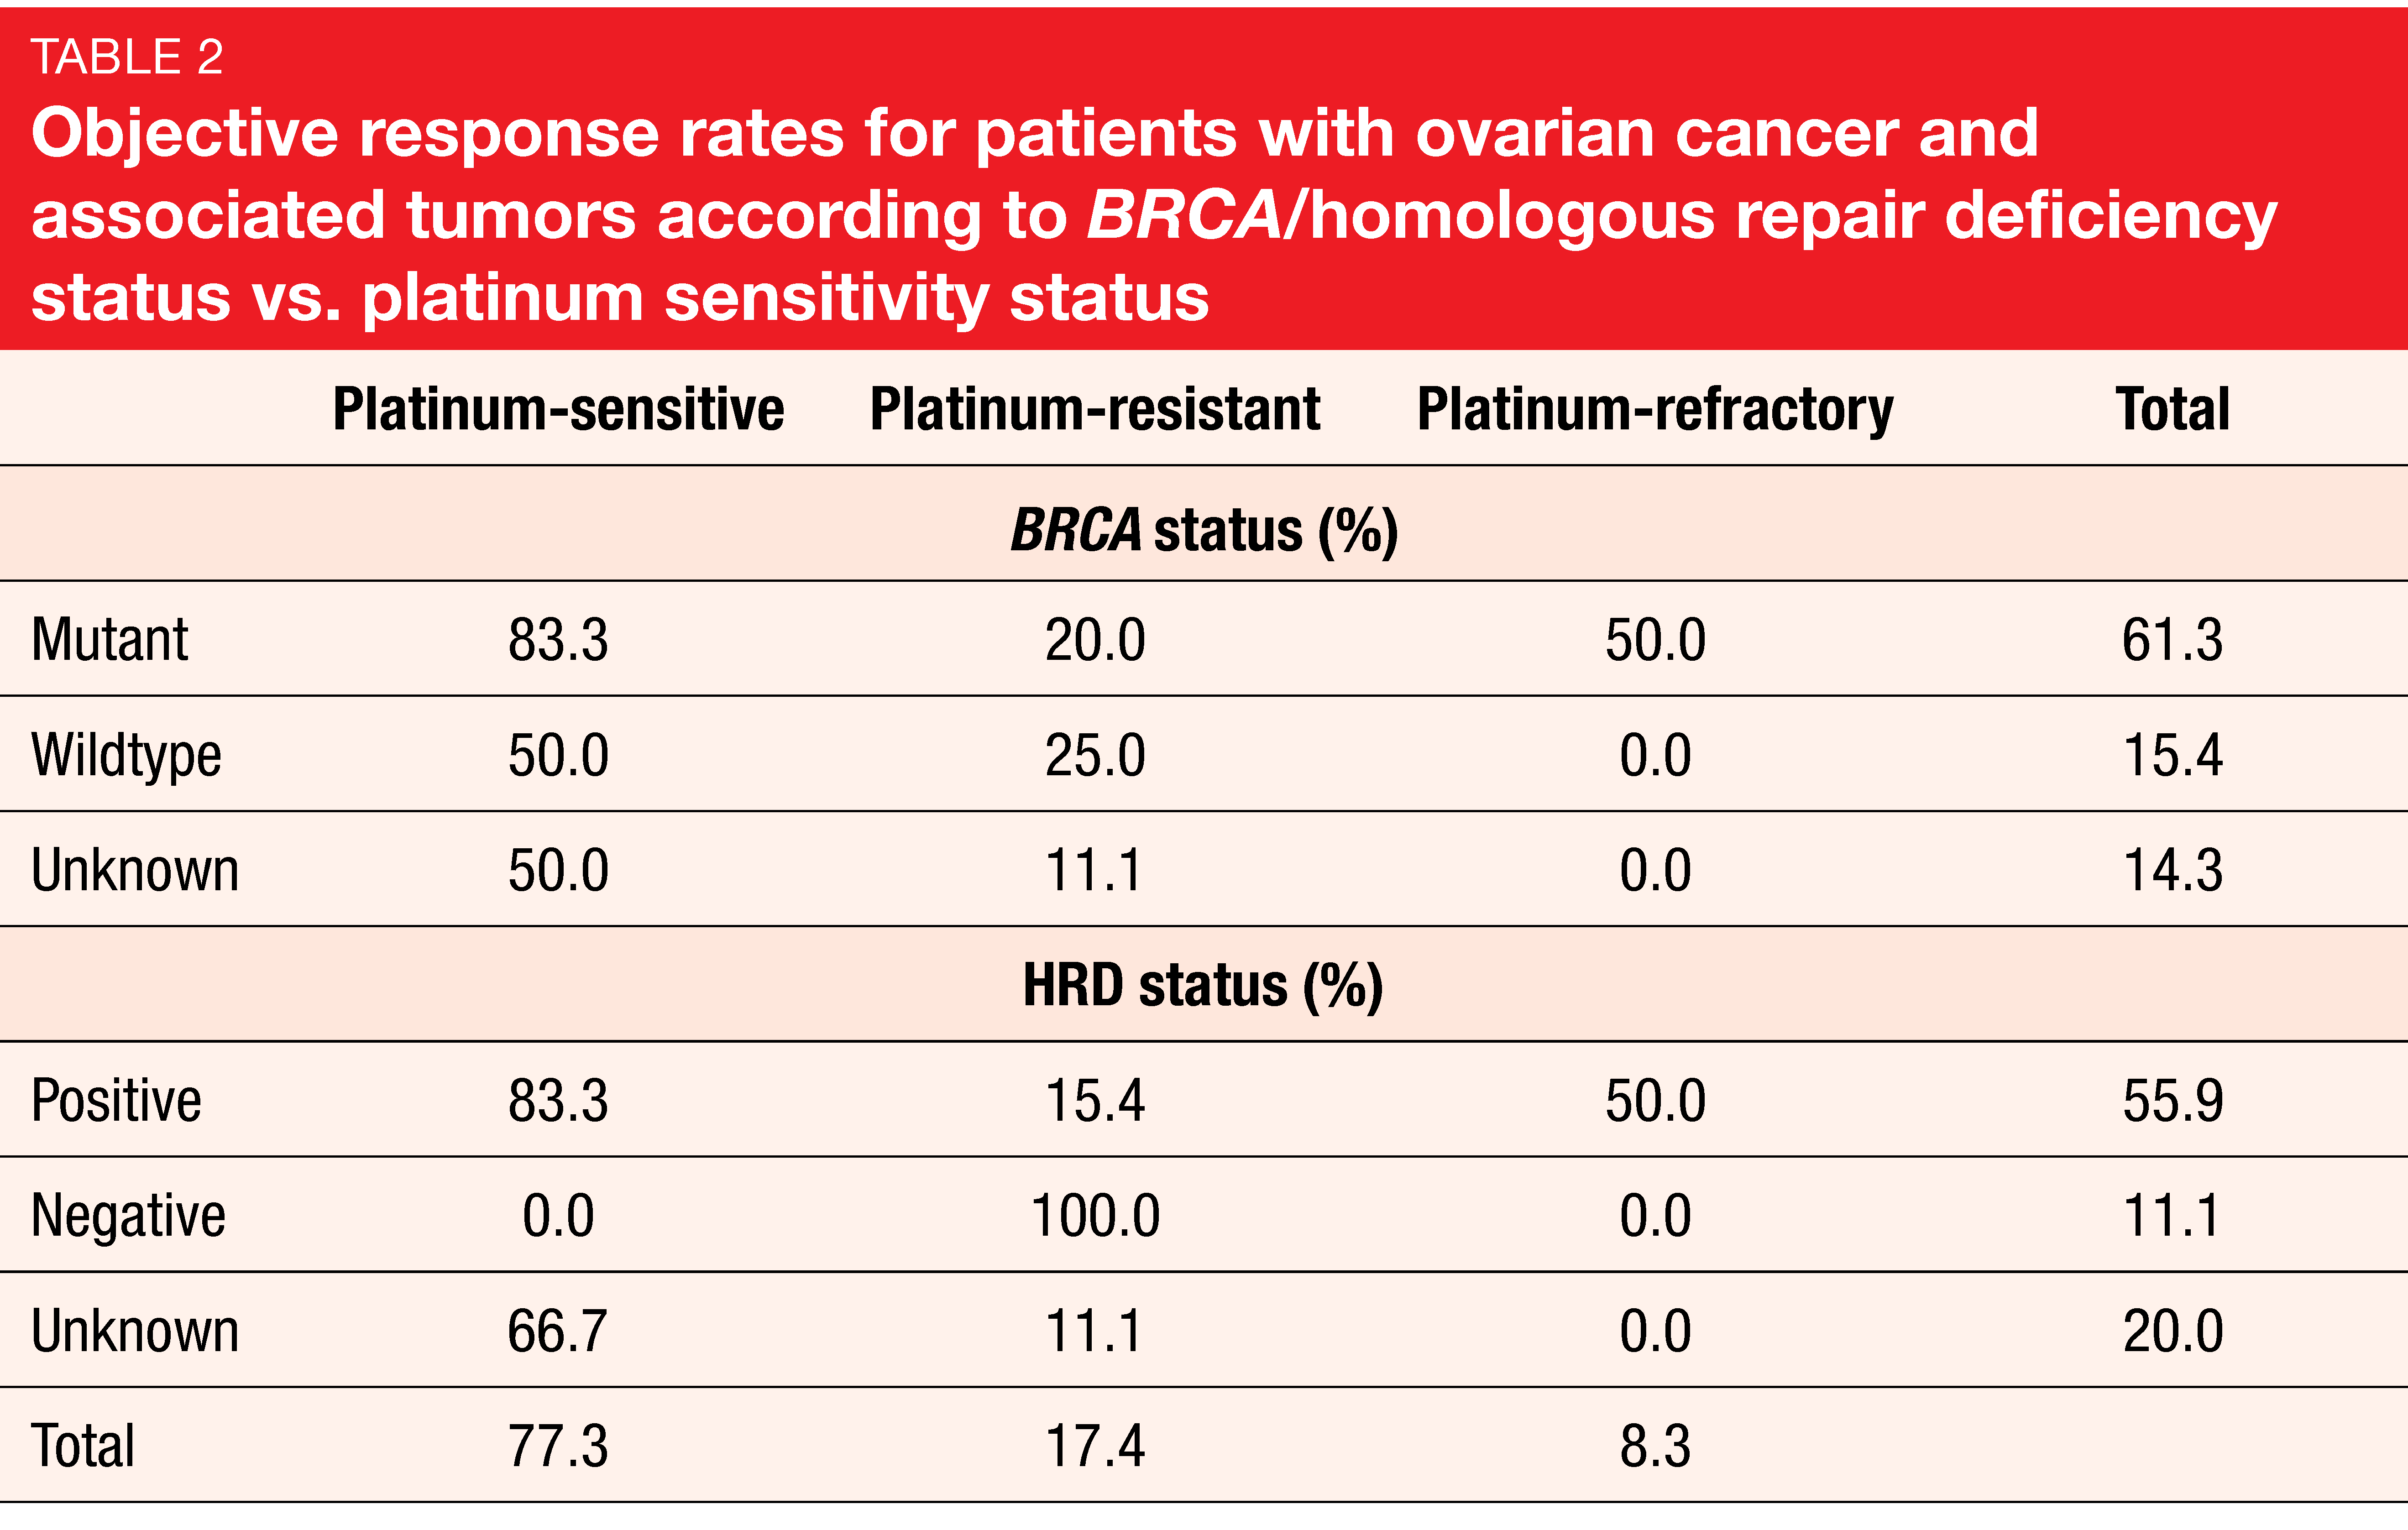 Objective response rates for patients with ovarian cancer and associated tumors according to BRCA/homologous repair deficiancy status vs. platinum sensitivity status